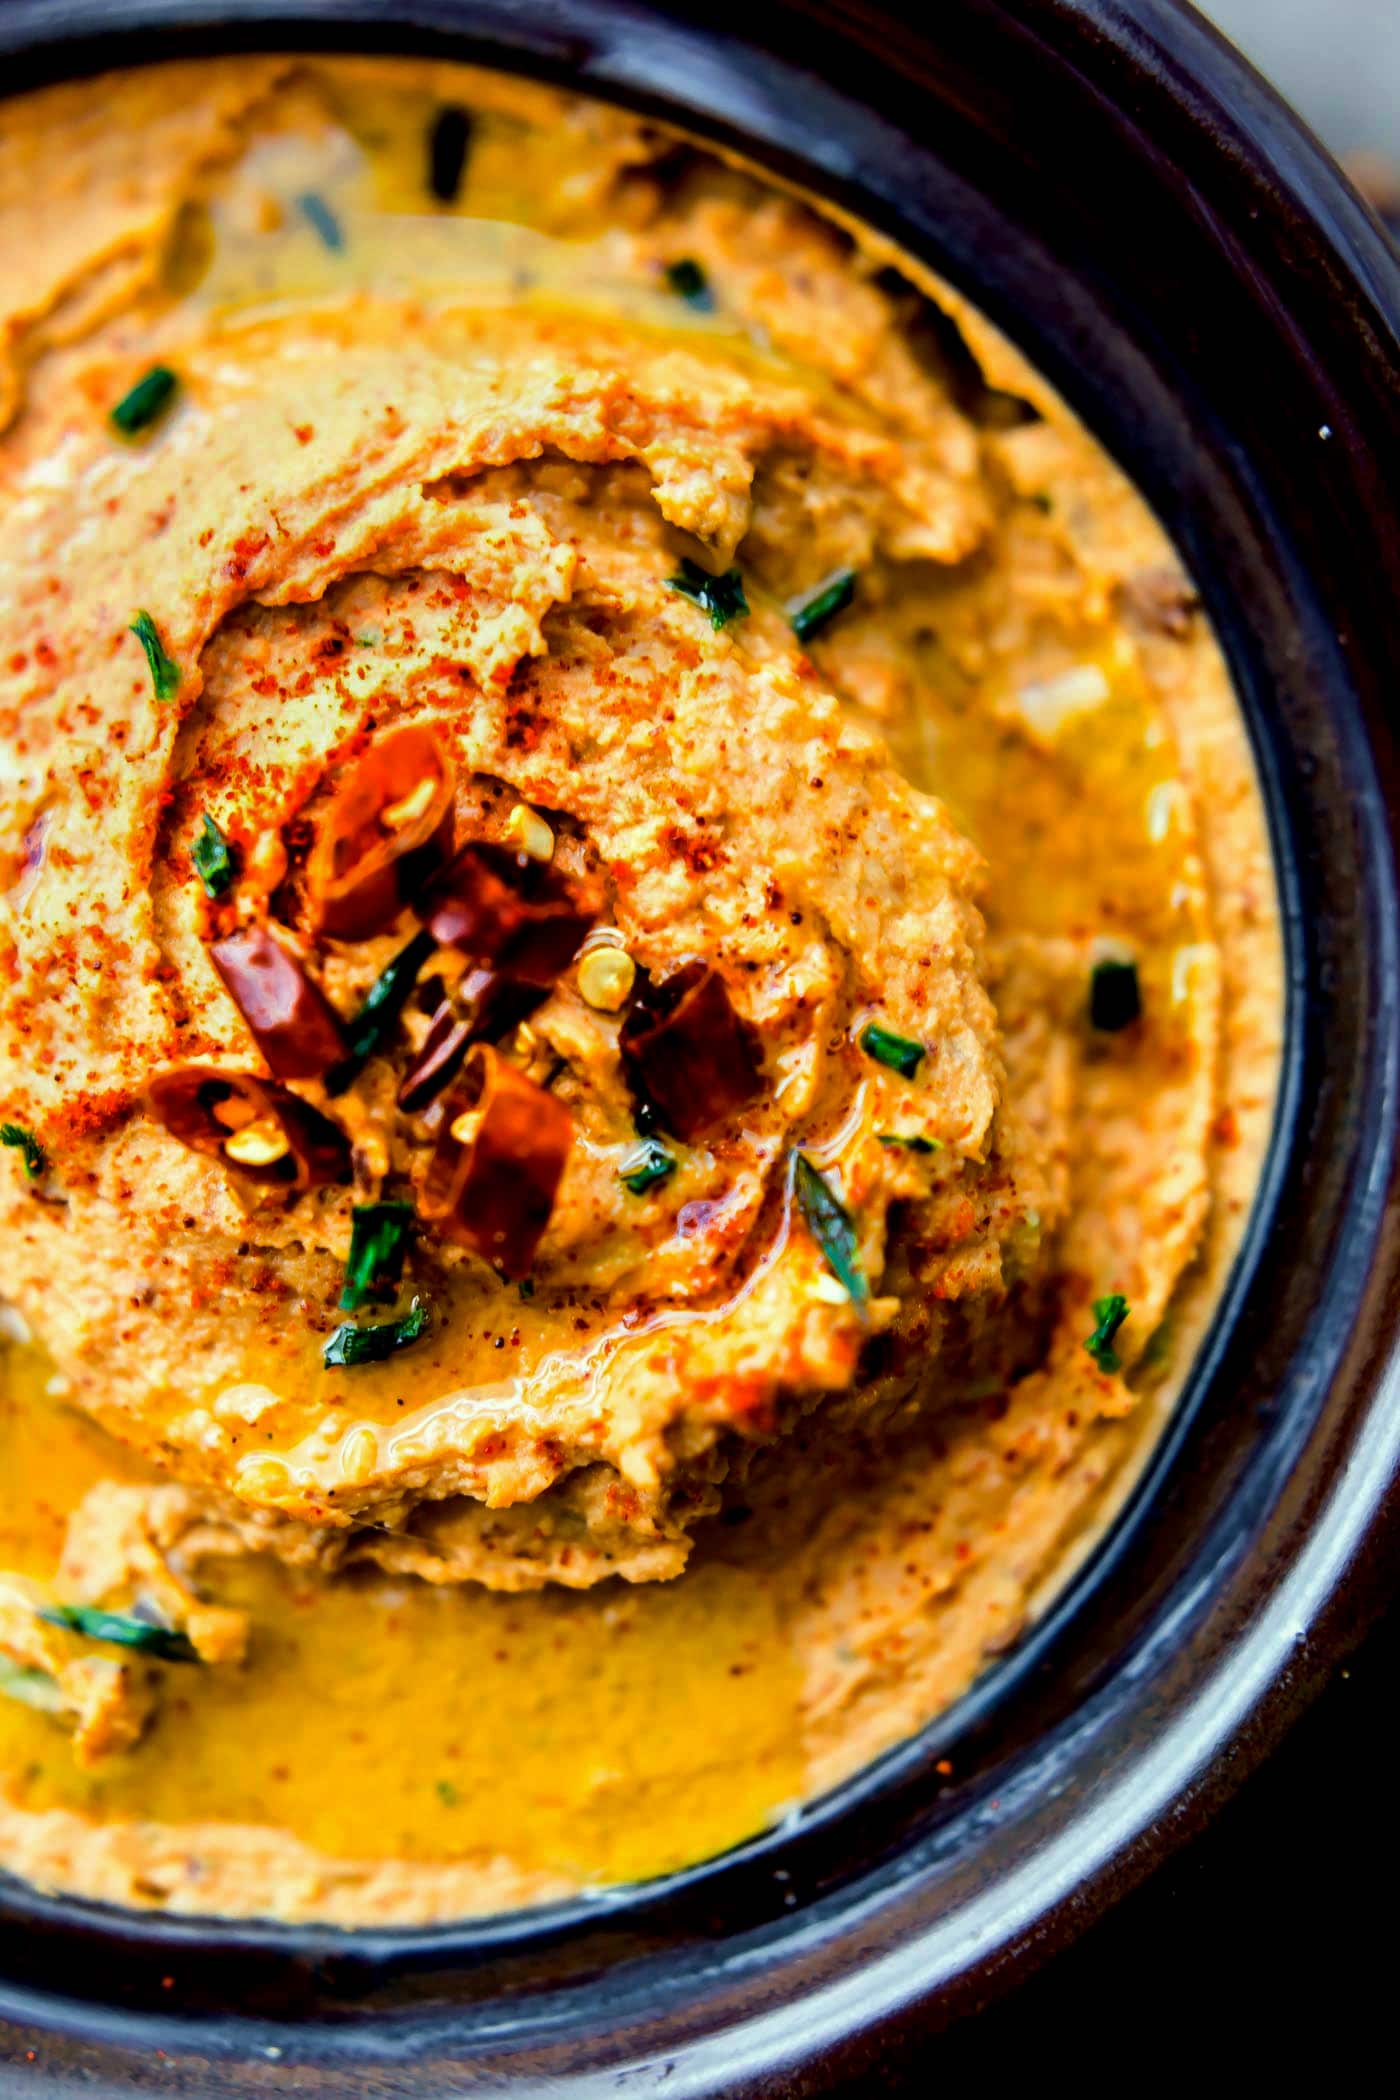 Chipotle Black Eyed Peas Hummus with spicy smokey flavor! A healthy twist on classic hummus with black eyed peas in place of garbanzo beans! Perfect for a snack or appetizer. Easy, vegan, gluten free. www.cottercrunch.com @cottercrunch